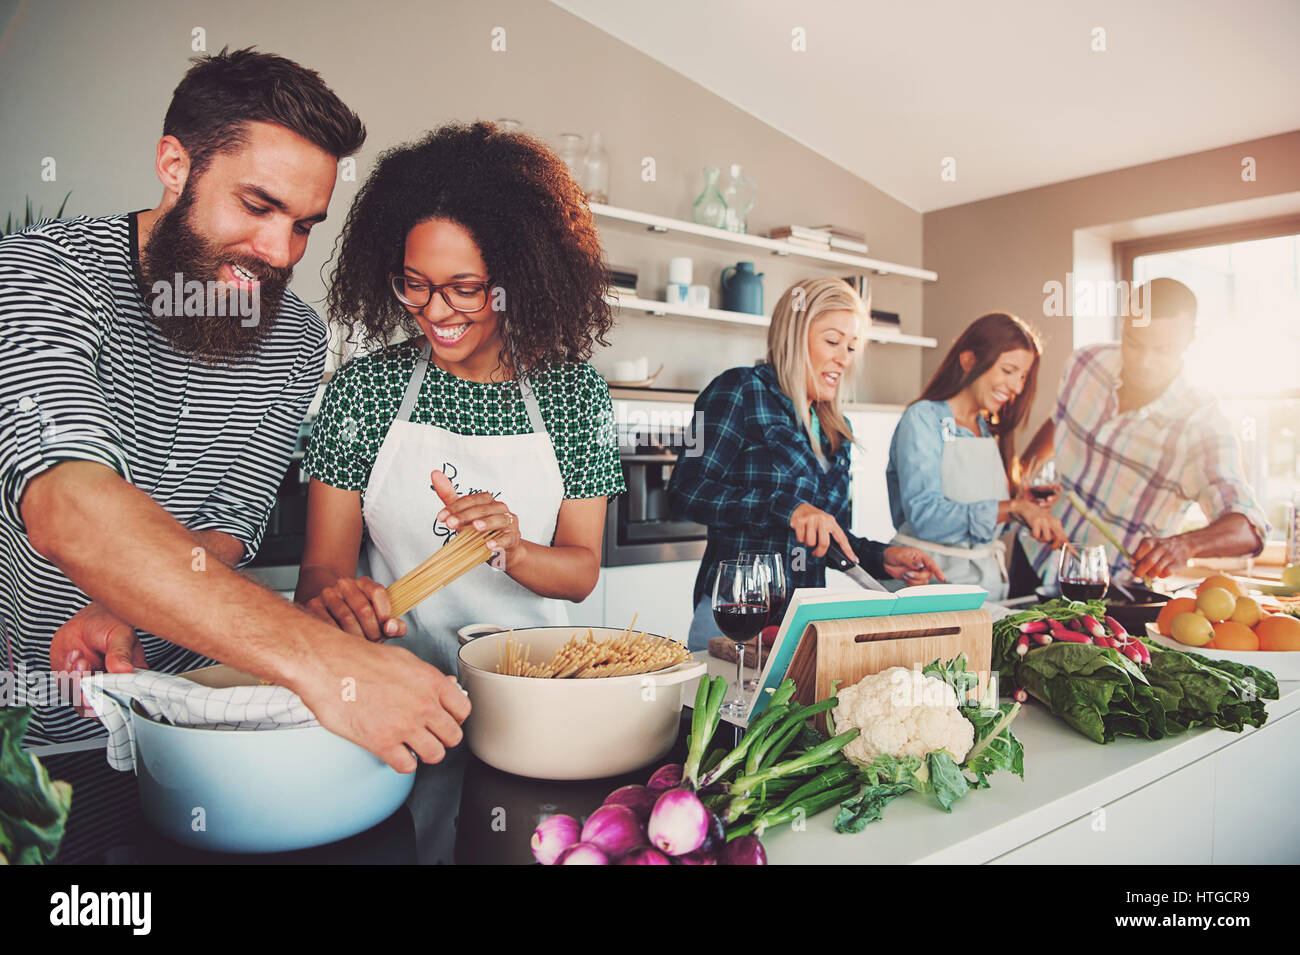 Five friends cheerfully cooking for an upcoming party Stock Photo